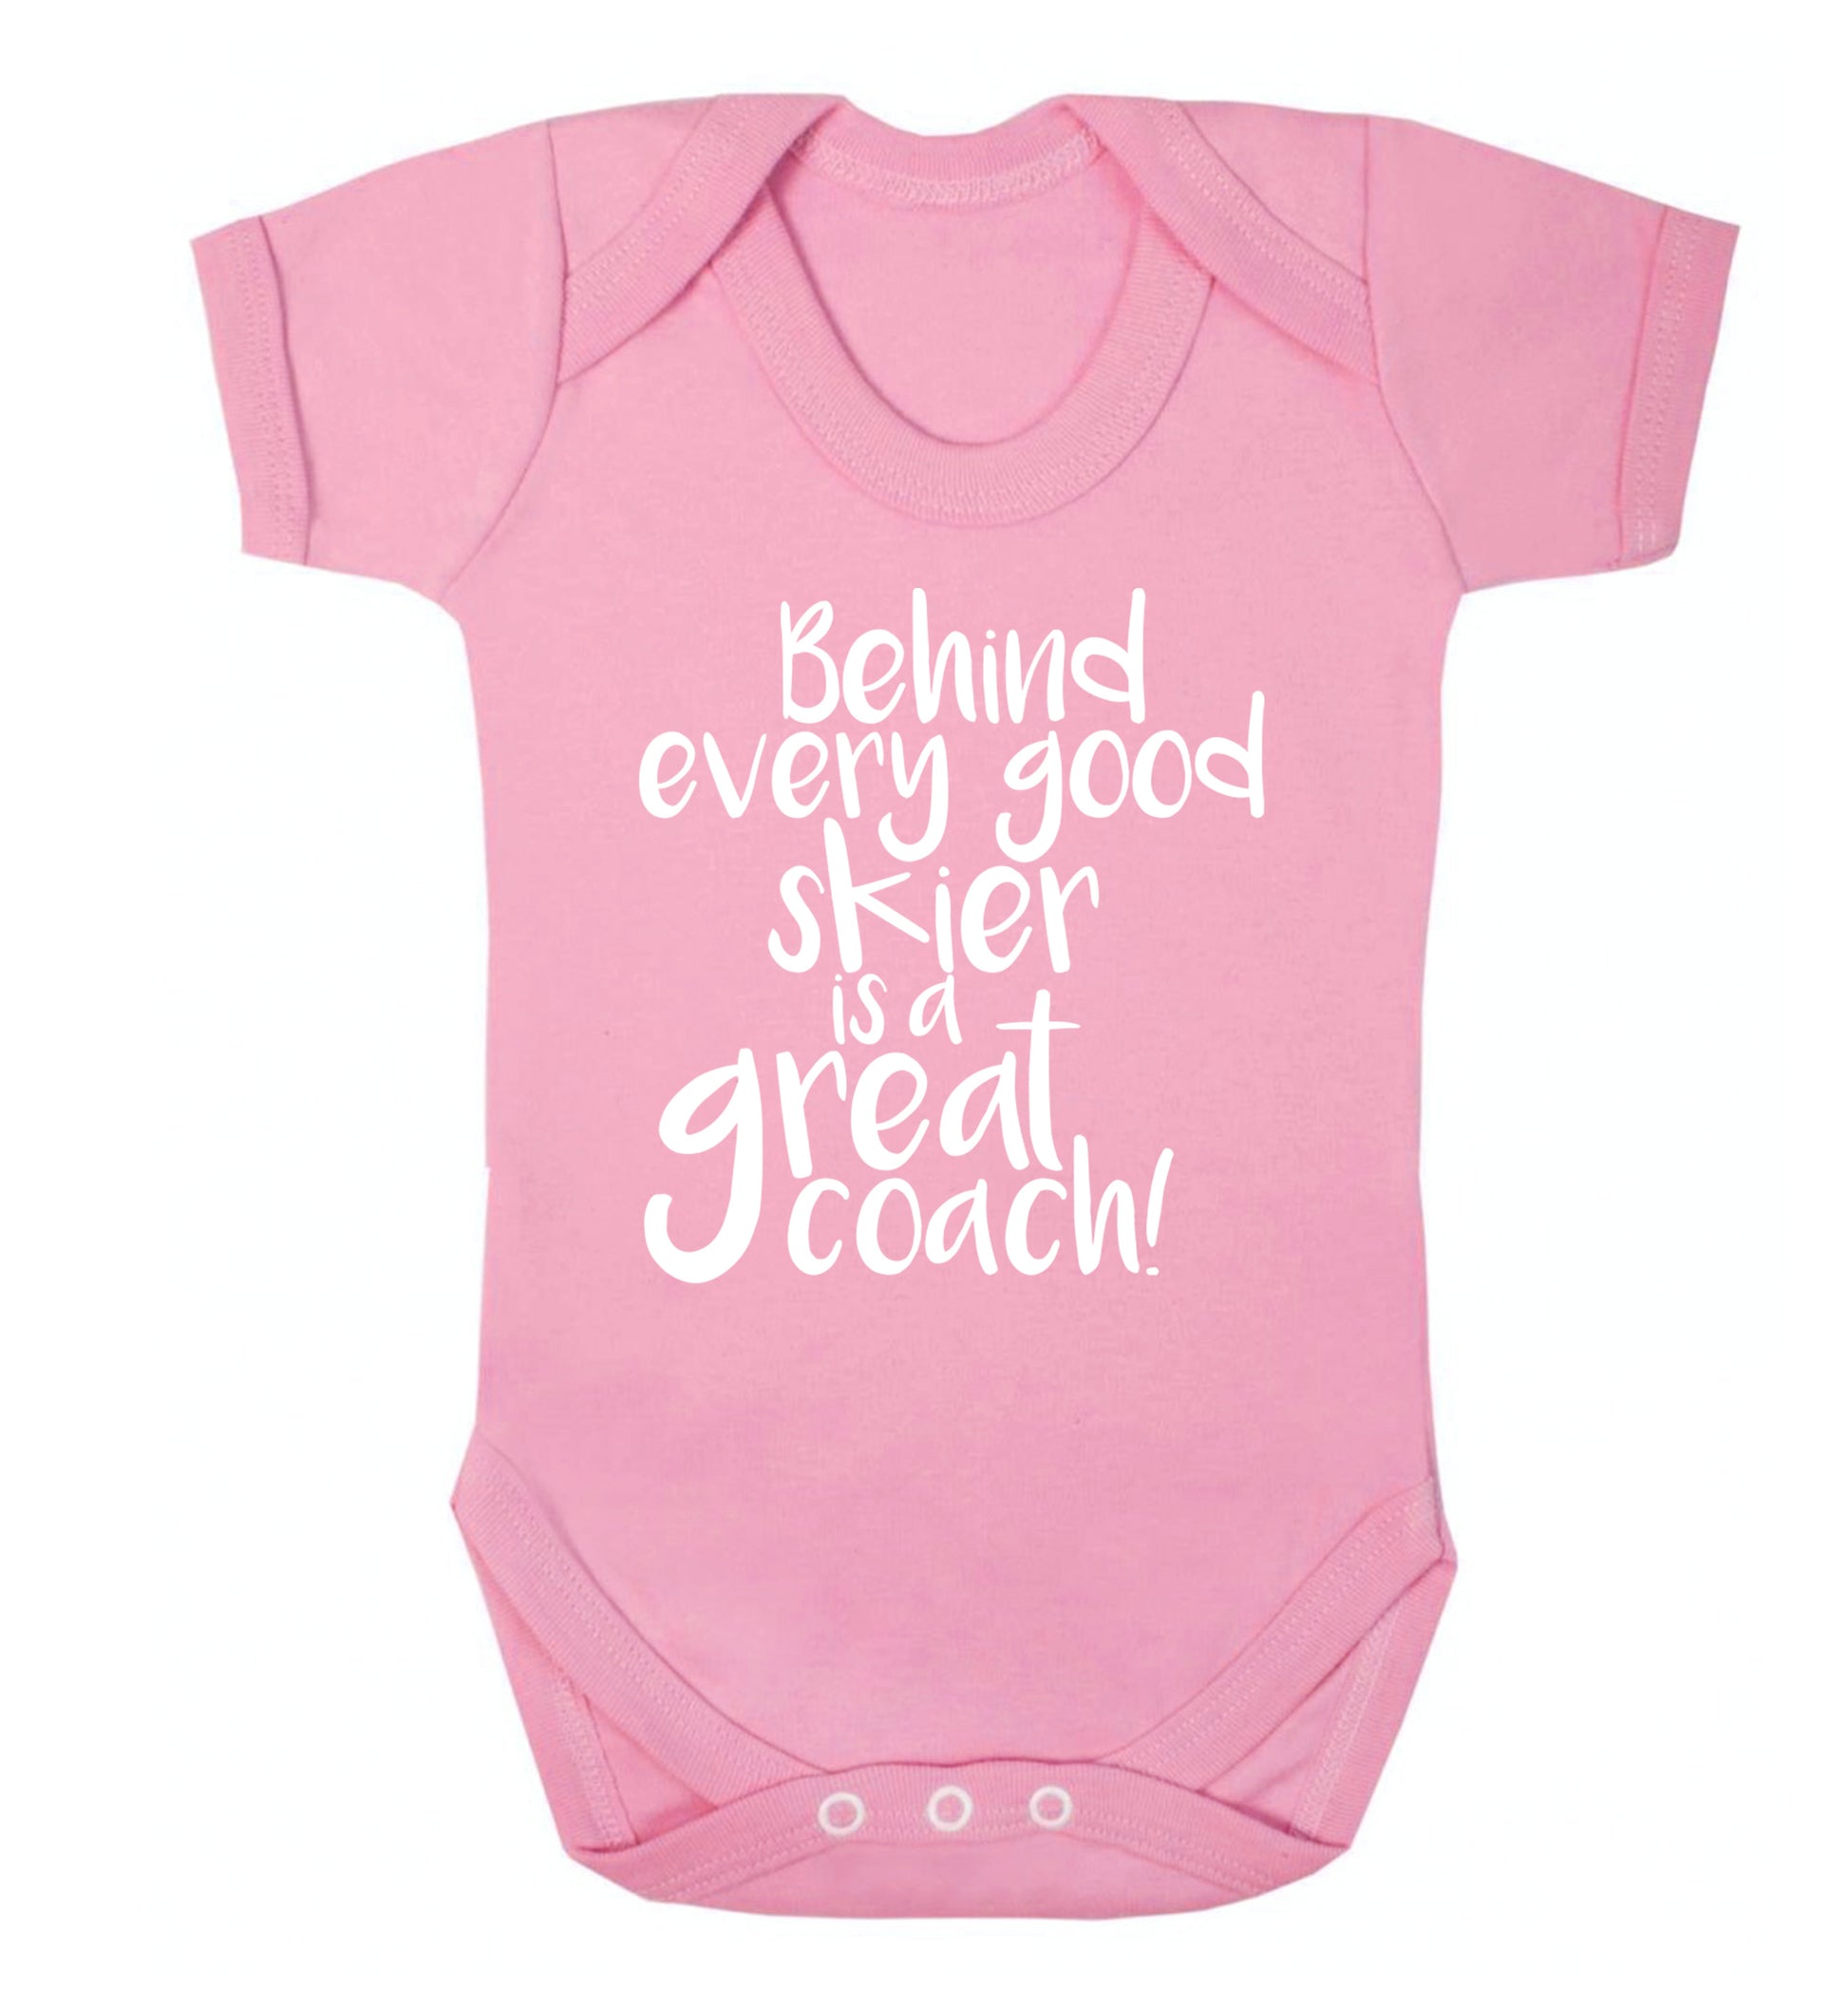 Behind every good skier is a great coach! Baby Vest pale pink 18-24 months